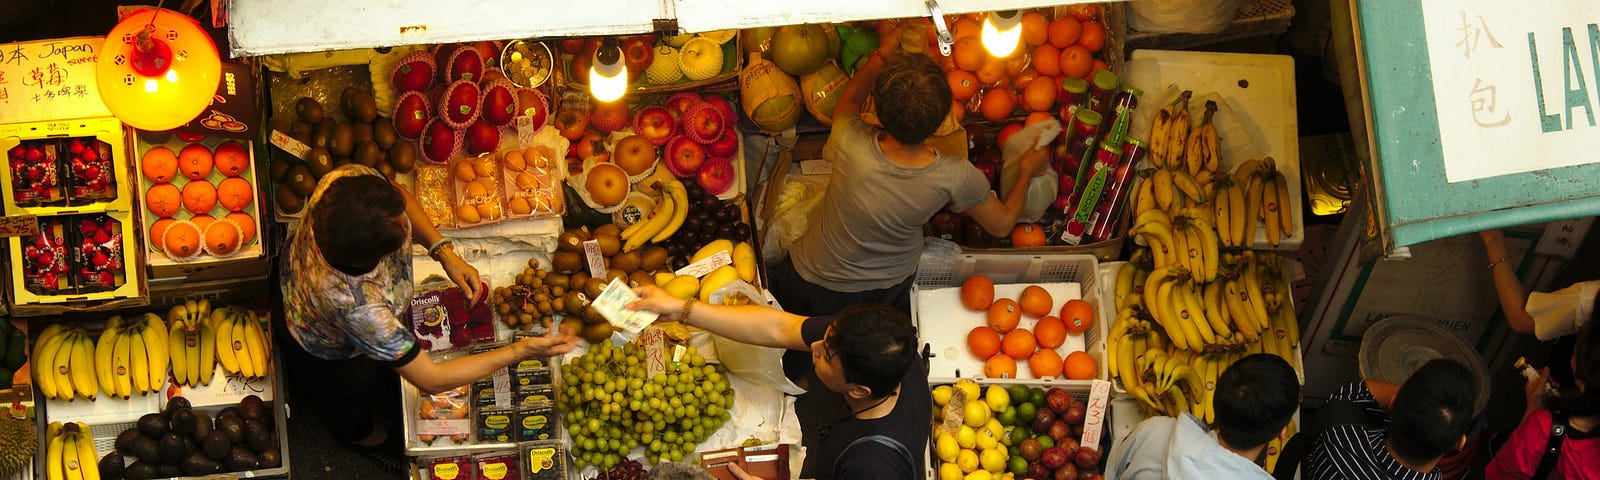 Overhead photo of people in a food market.